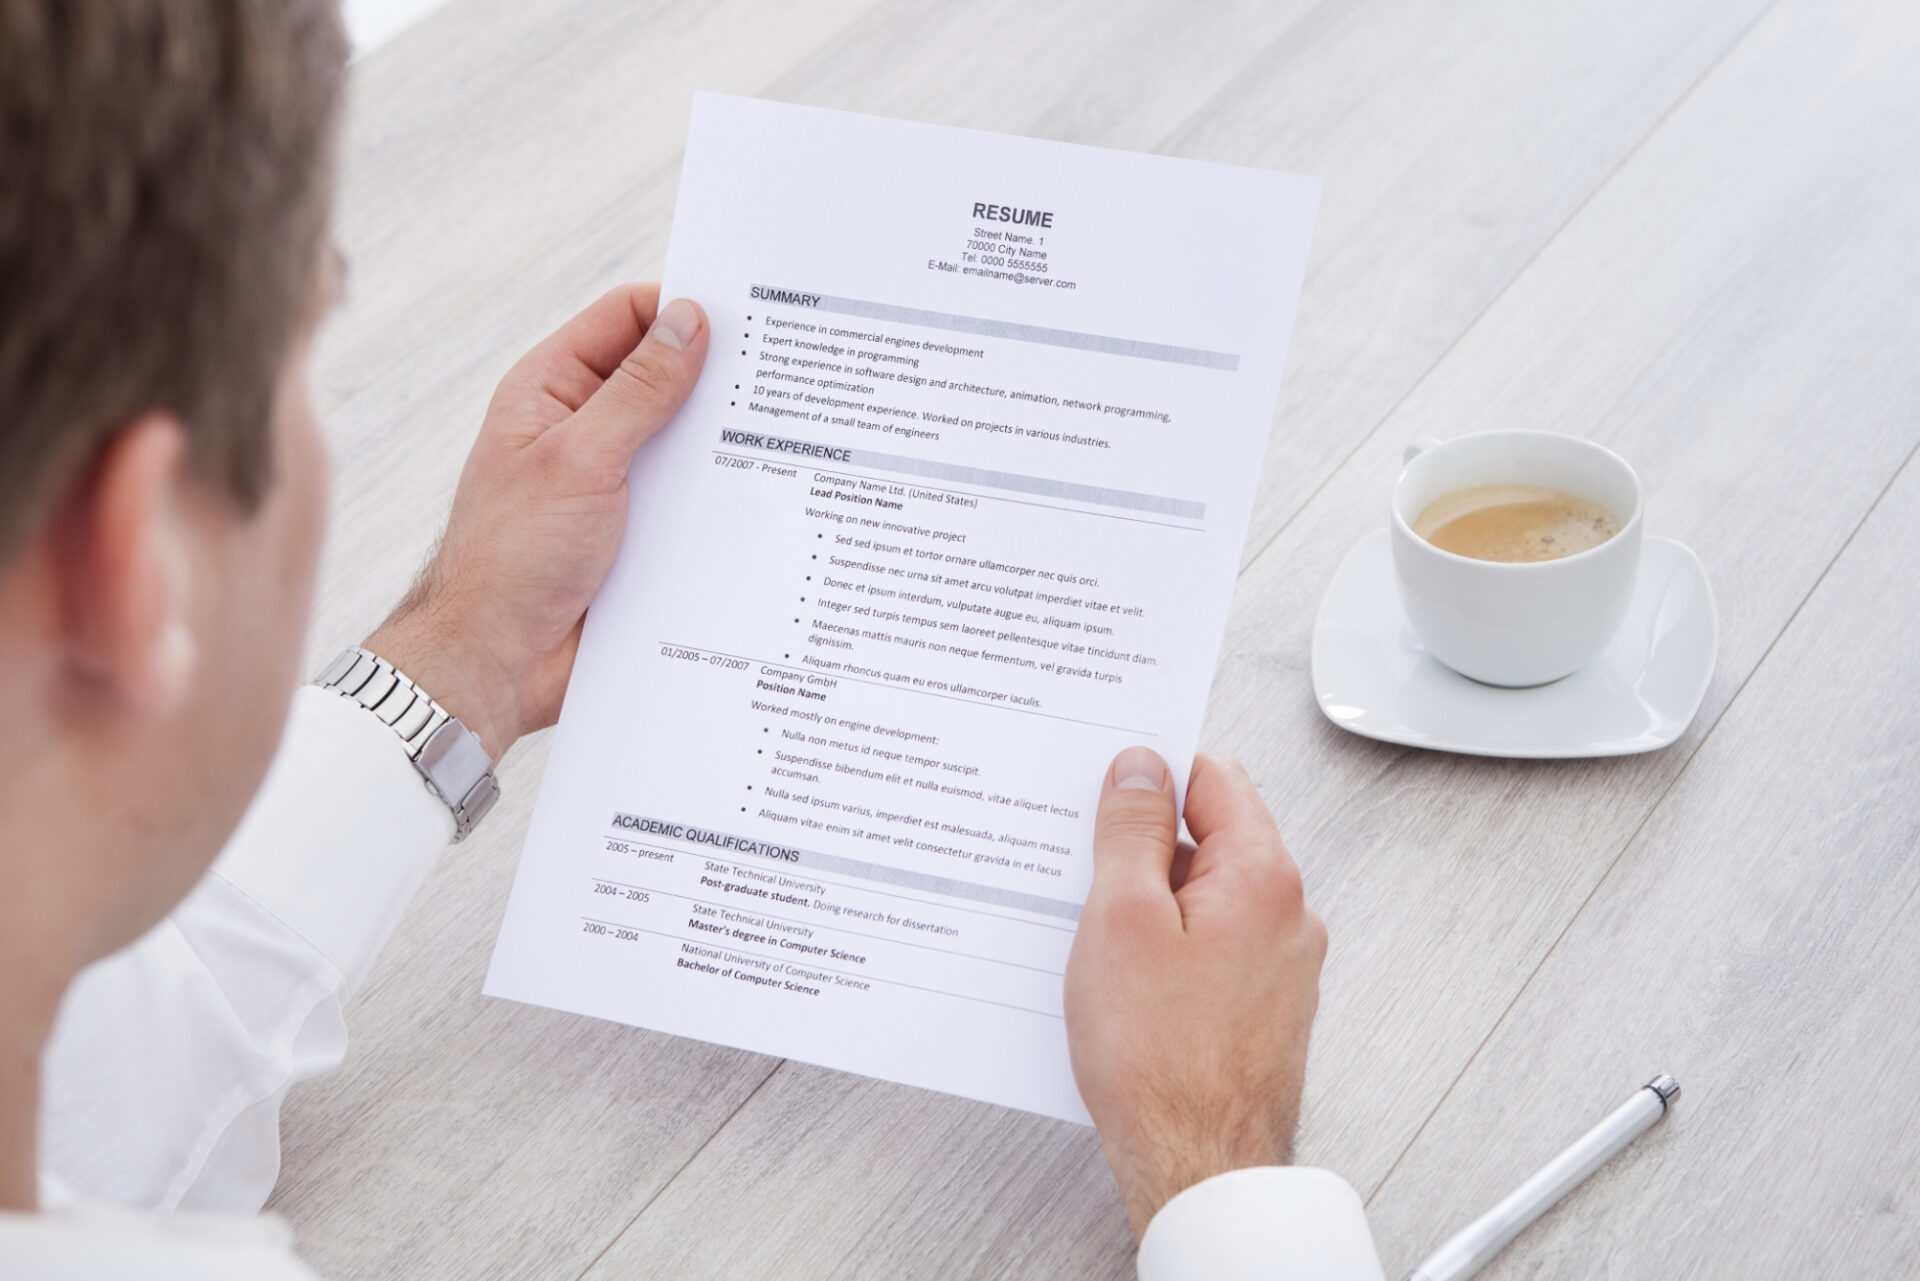 Businessman Reading Resume With Tea Cup On Desk